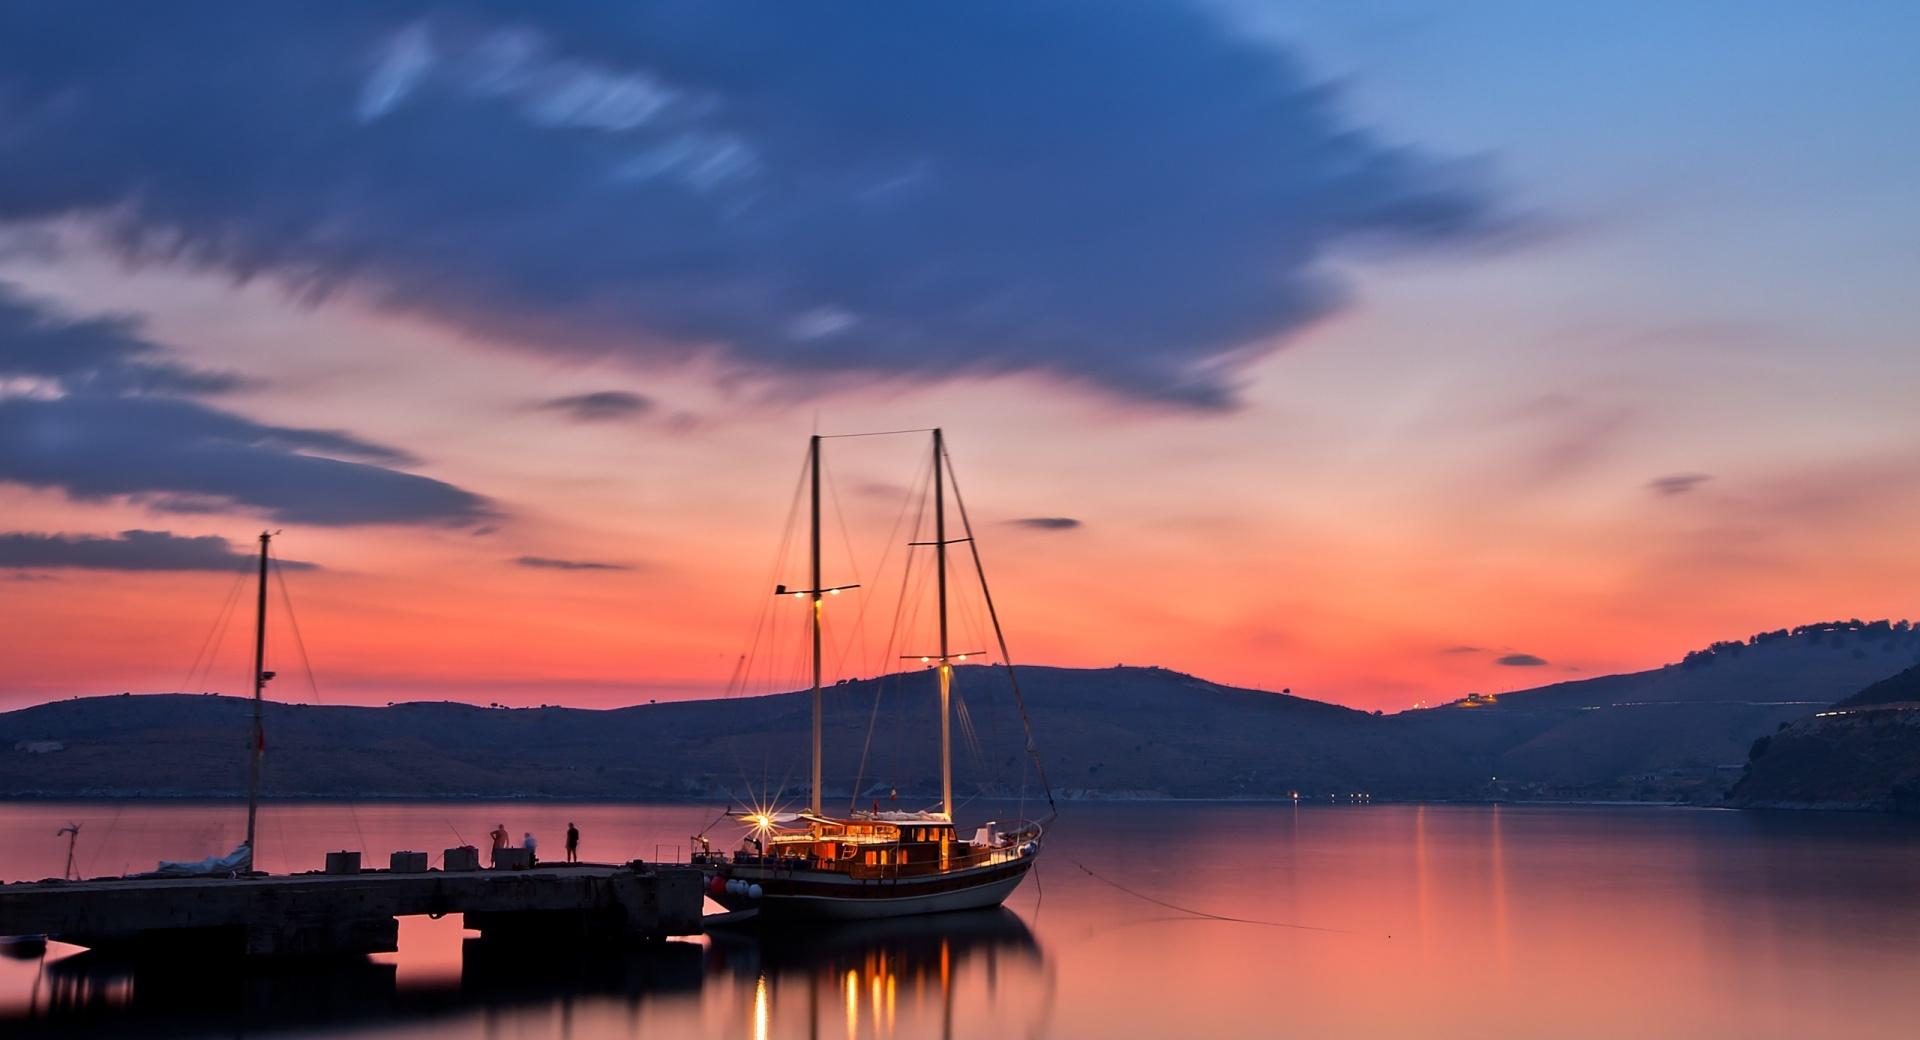 Boat At Sunset wallpapers HD quality